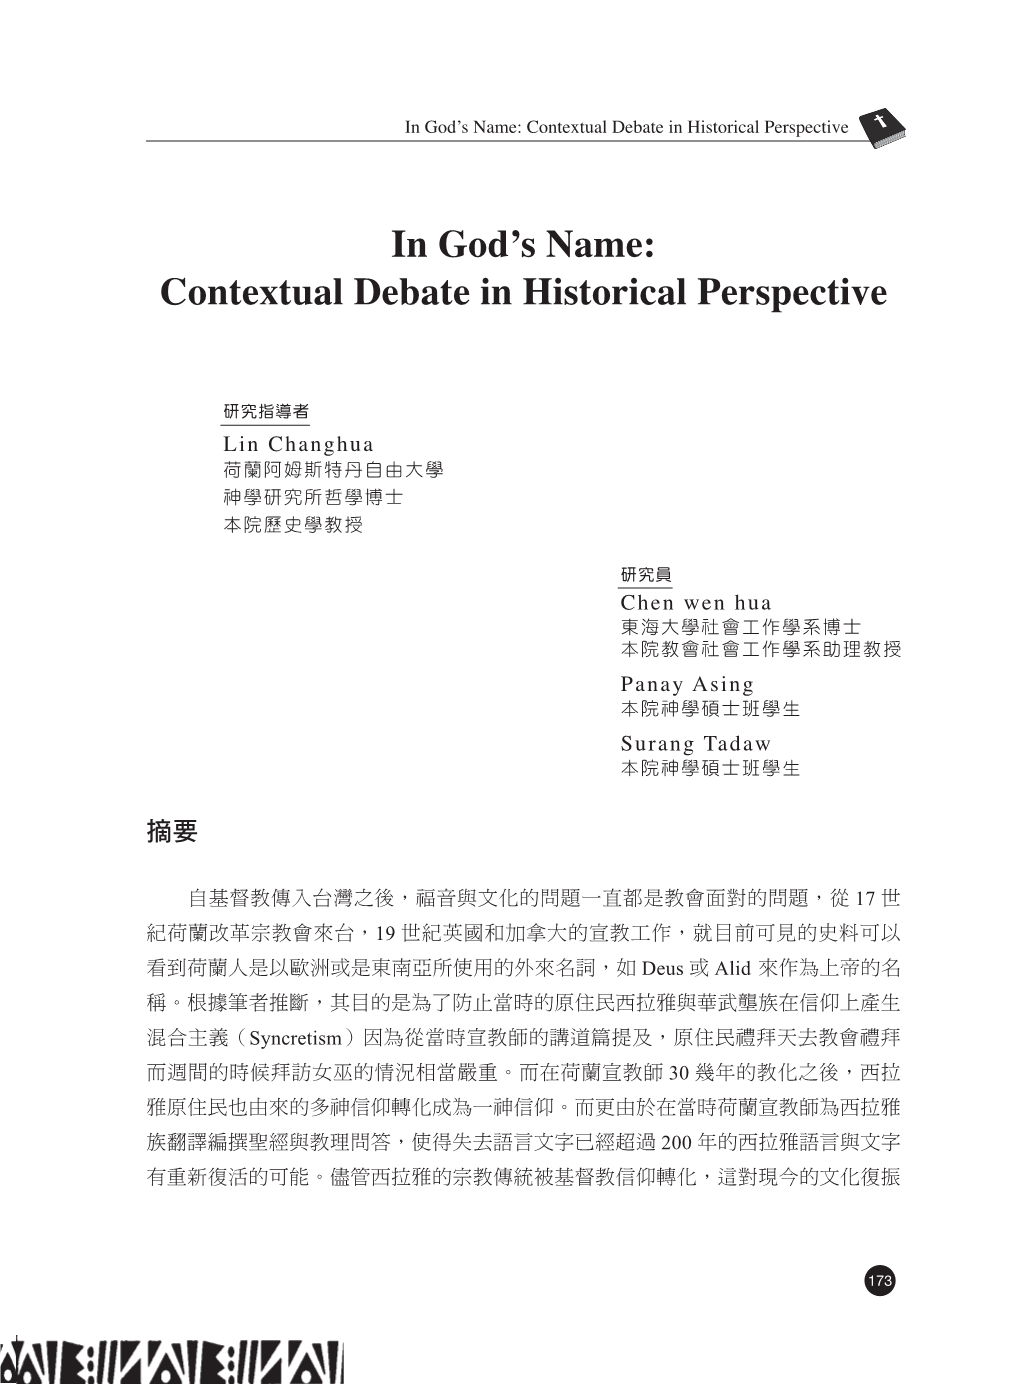 In God's Name: Contextual Debate in Historical Perspective